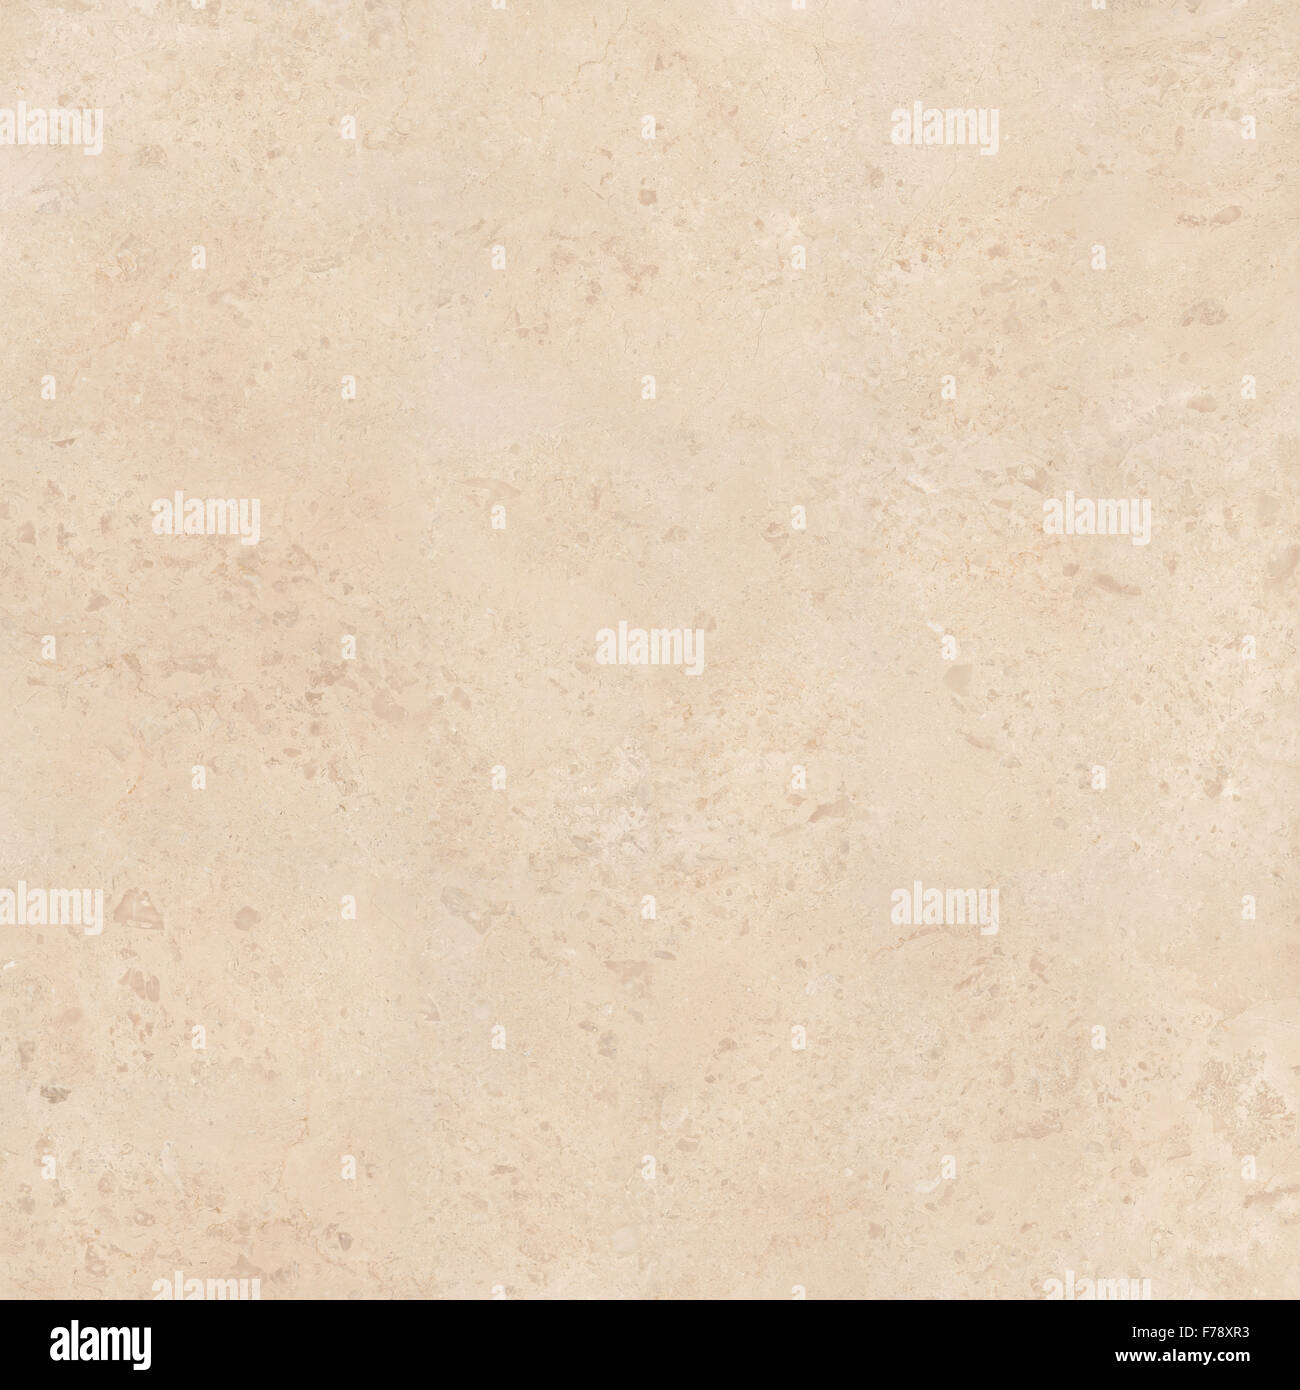 Light beige marble with natural stone texture background. Approximately 6 by 6 foot area. Stock Photo